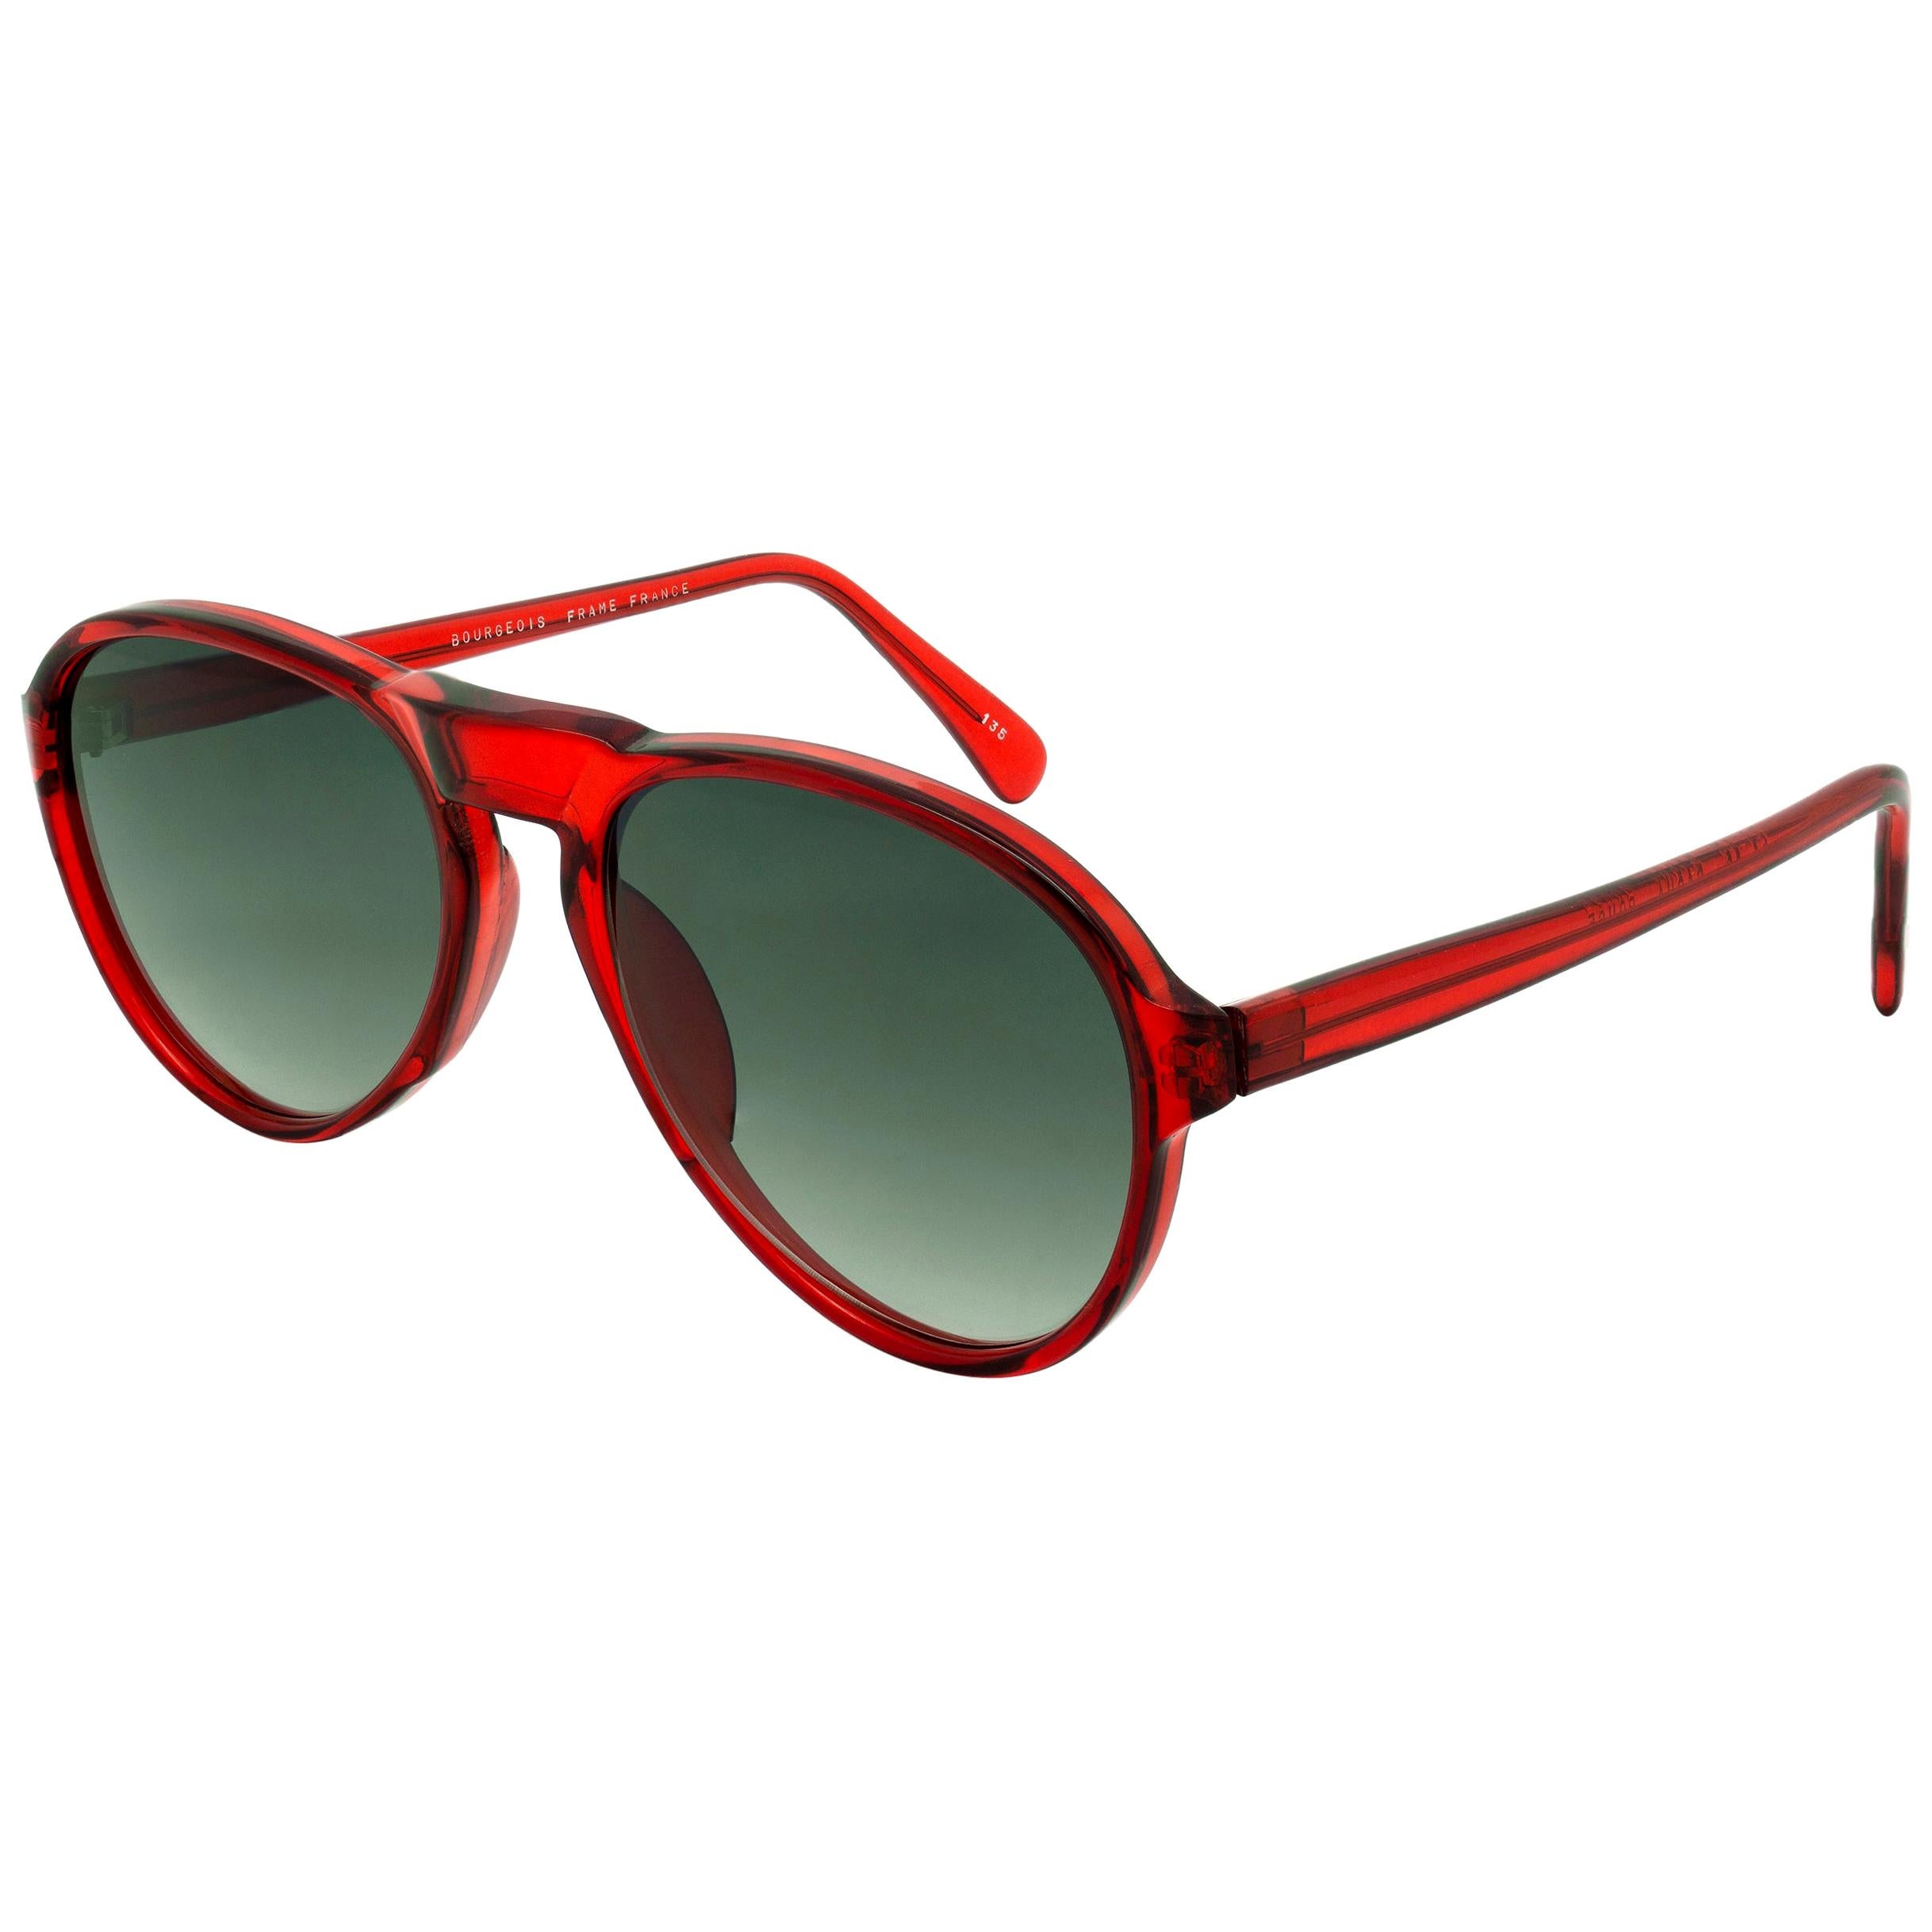 Bourgeois aviator sunglasses red, FRANCE For Sale